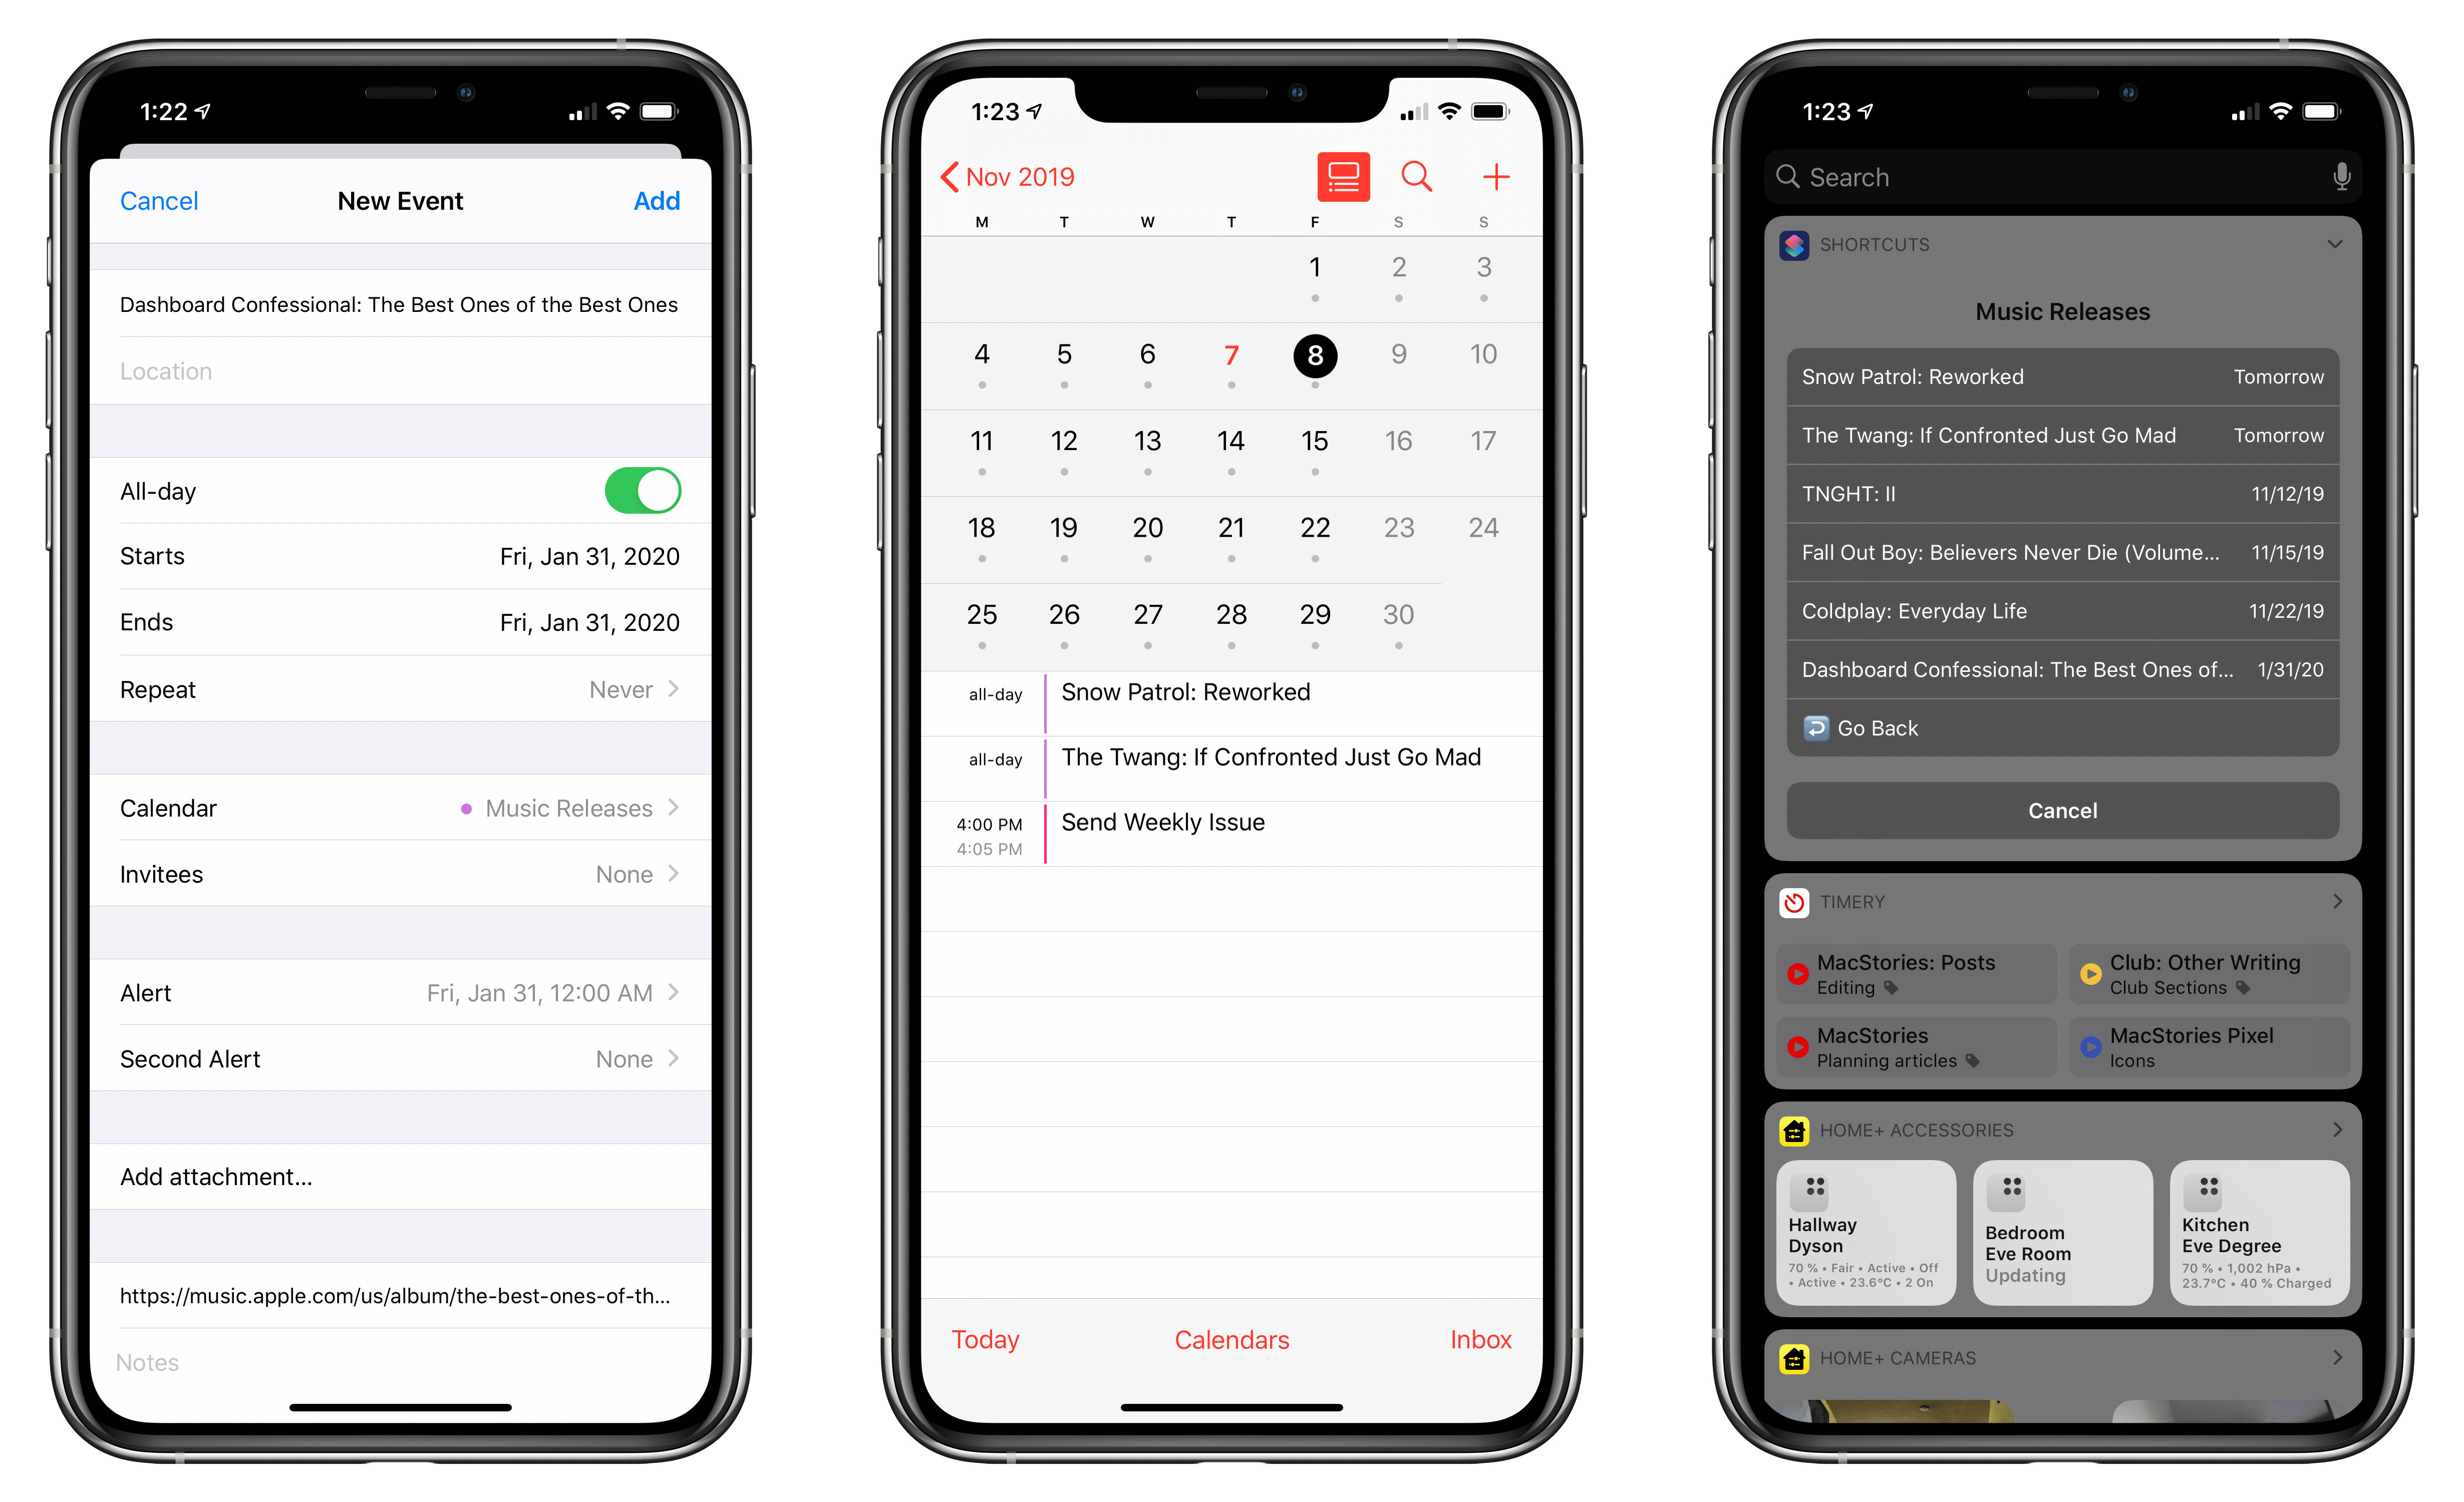 I can see upcoming music releases in the Calendar app as well as custom shortcuts that integrate with the system calendar.